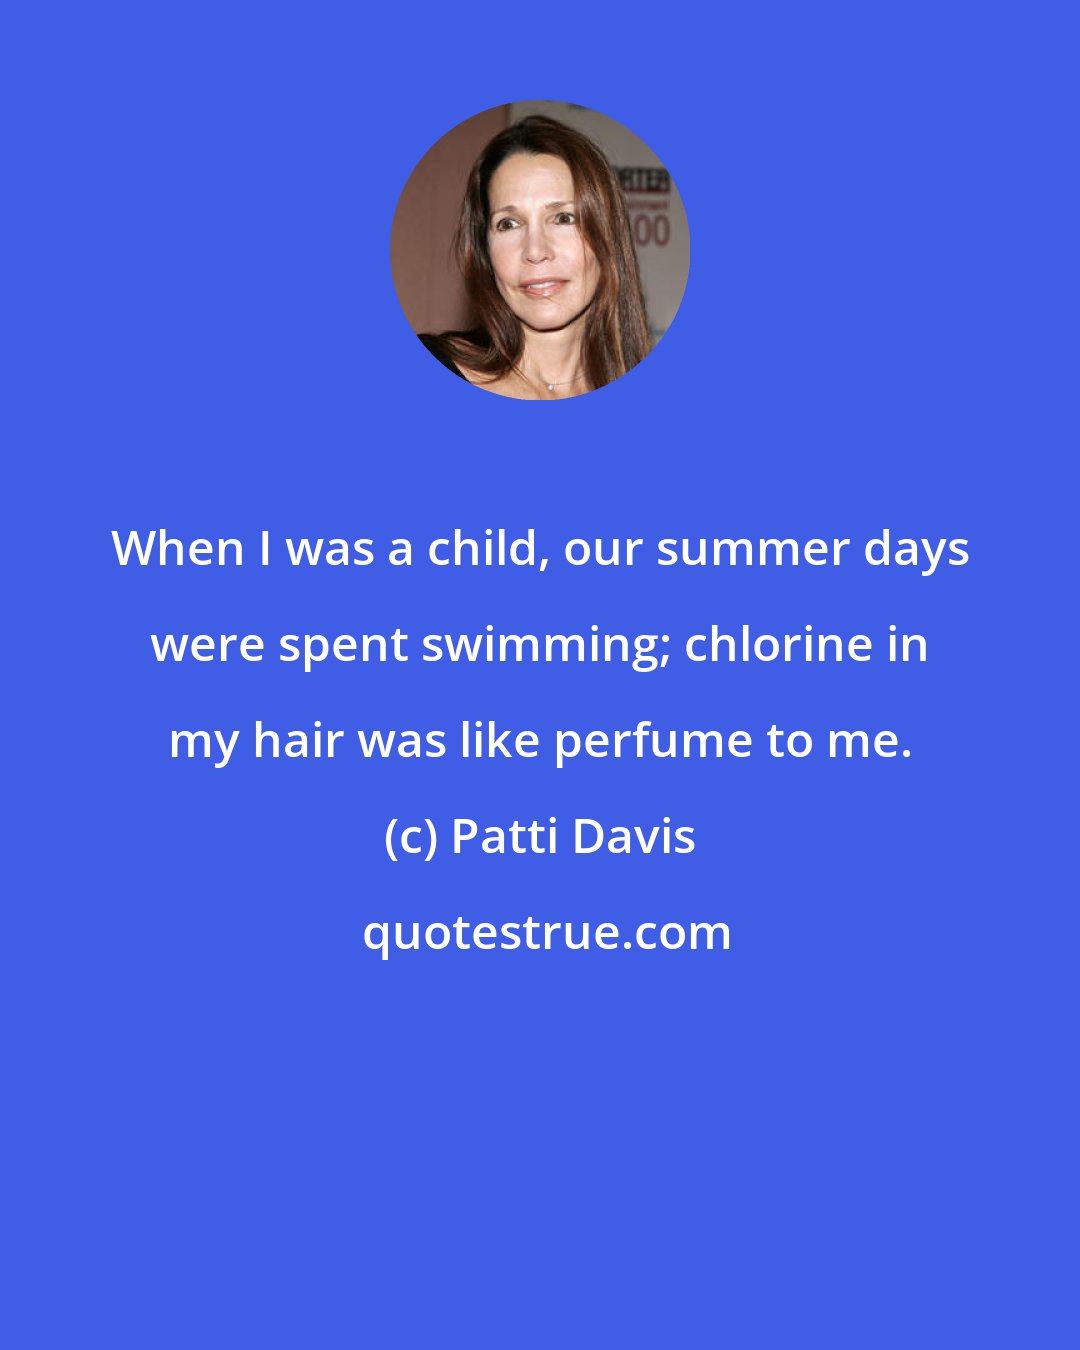 Patti Davis: When I was a child, our summer days were spent swimming; chlorine in my hair was like perfume to me.